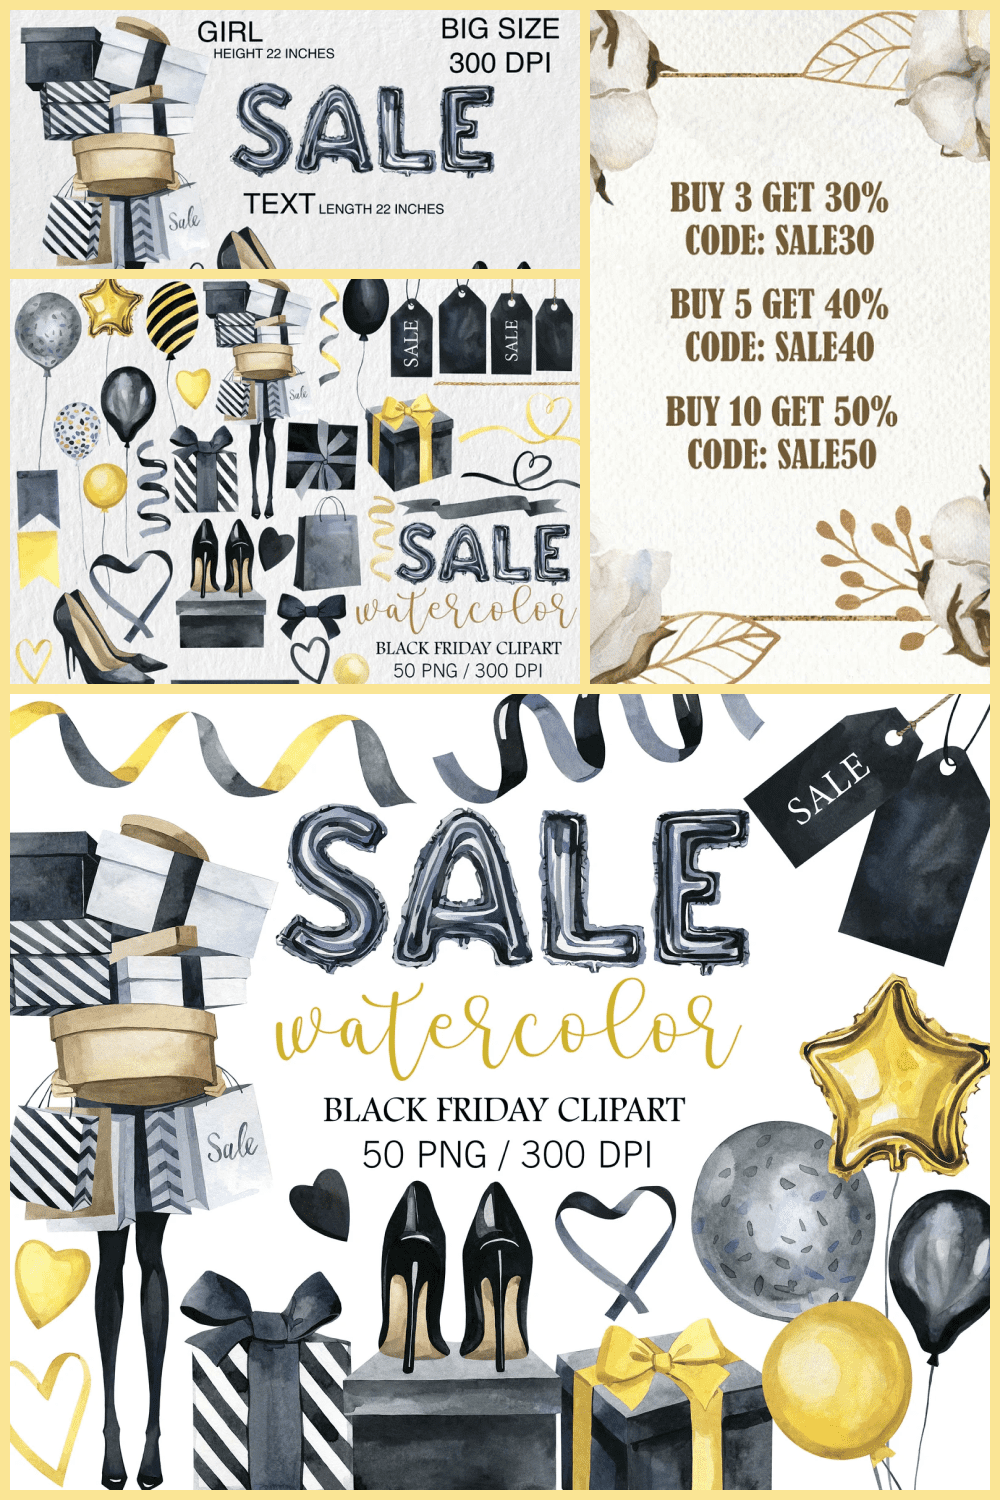 Watercolor Black Friday Clipart With Balloons and Women's Clothes.